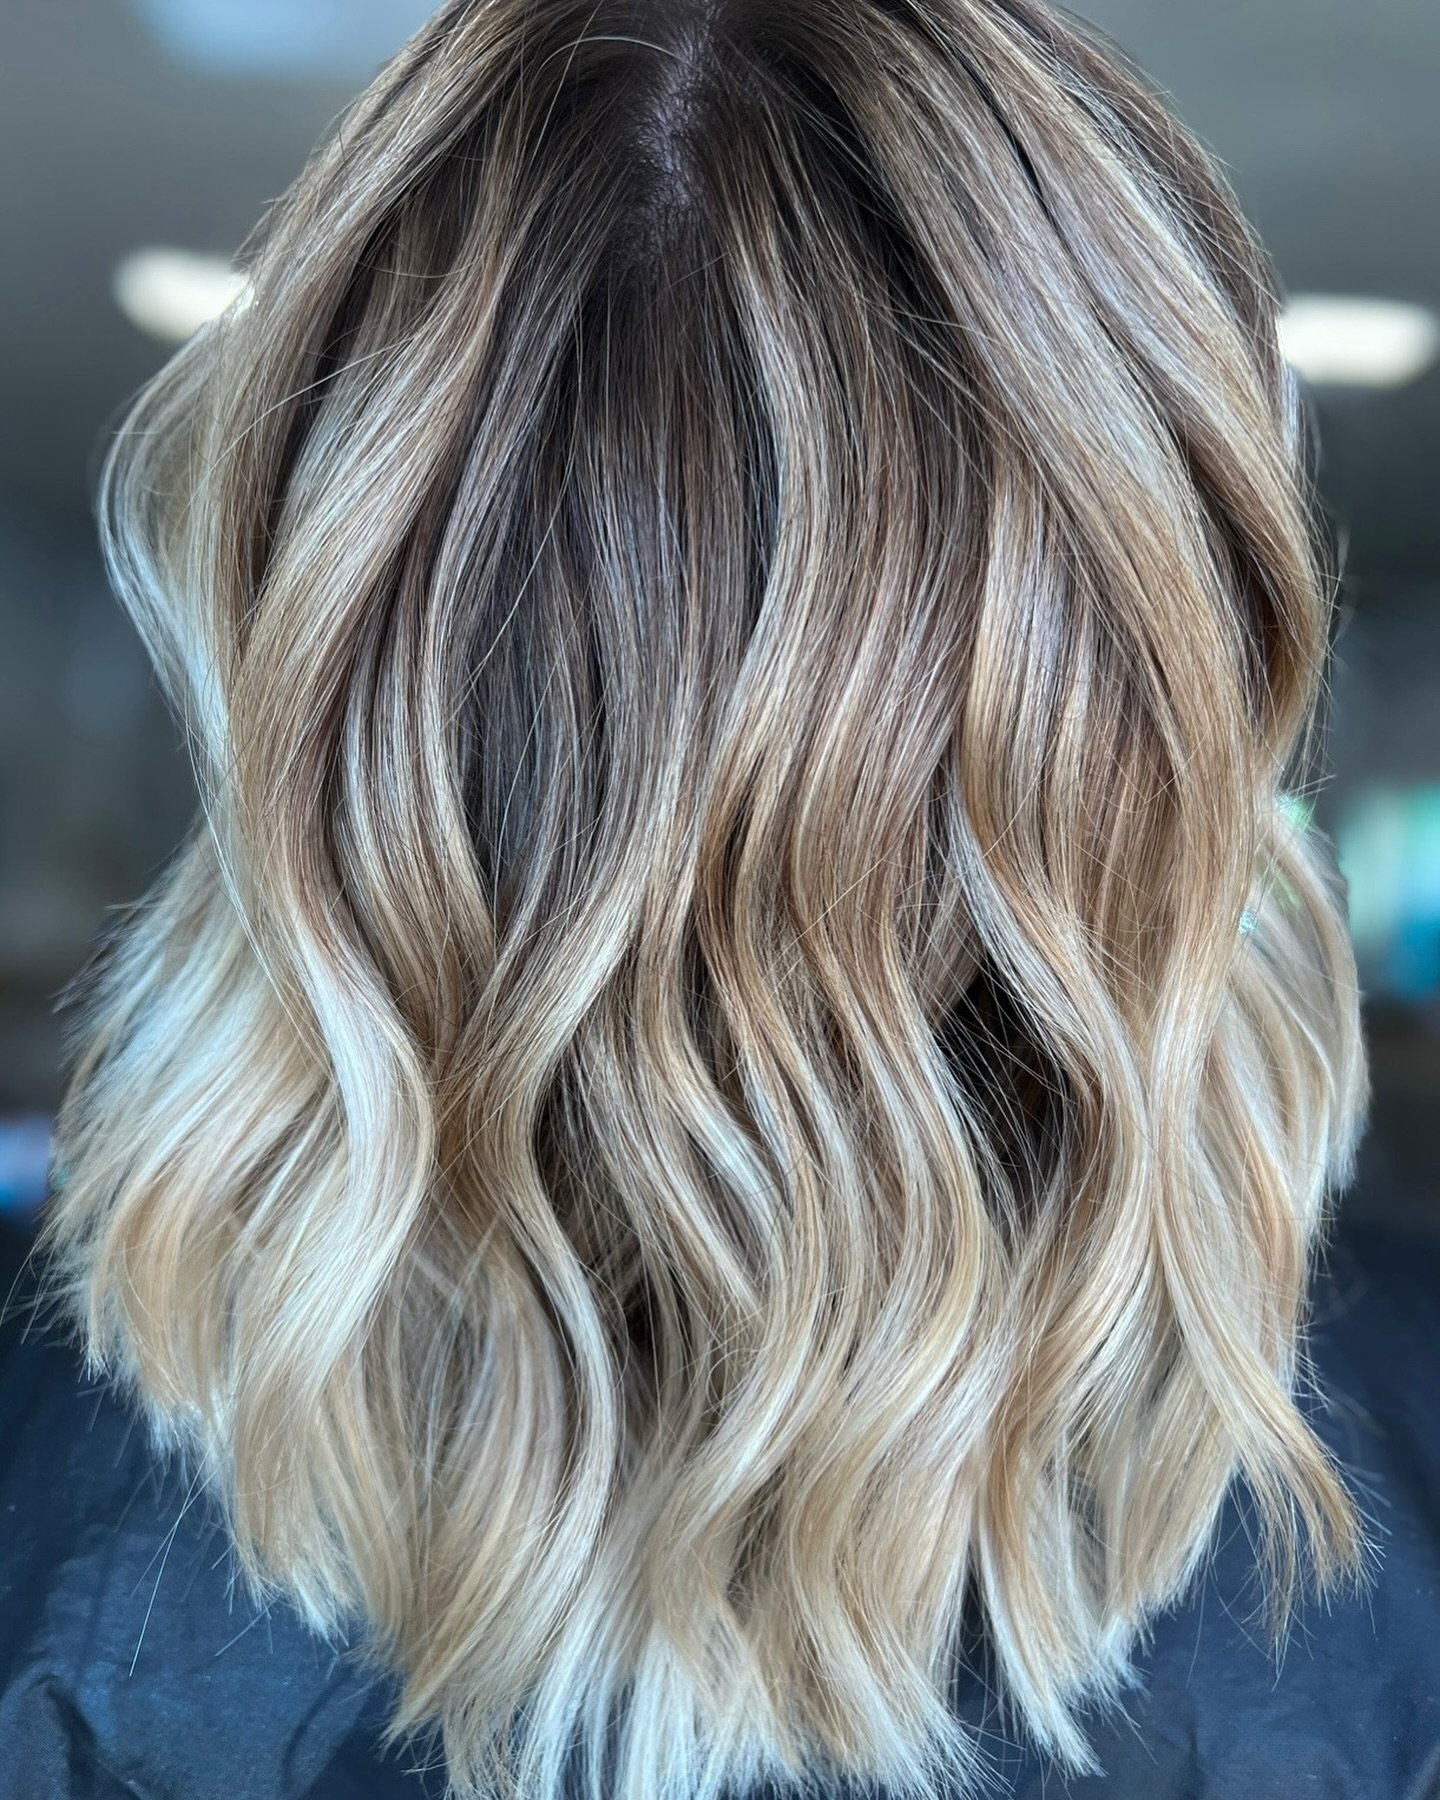 Embrace dimensional color that feels effortlessly lived in. 
⠀⠀⠀⠀⠀⠀⠀⠀⠀
Subtle sophisticated look, where less is more. Effortless lived in color is the new trend for summer. 
⠀⠀⠀⠀⠀⠀⠀⠀⠀
Are you cool for summer?

#kcsalon #kansascityhairstylist #kansasc